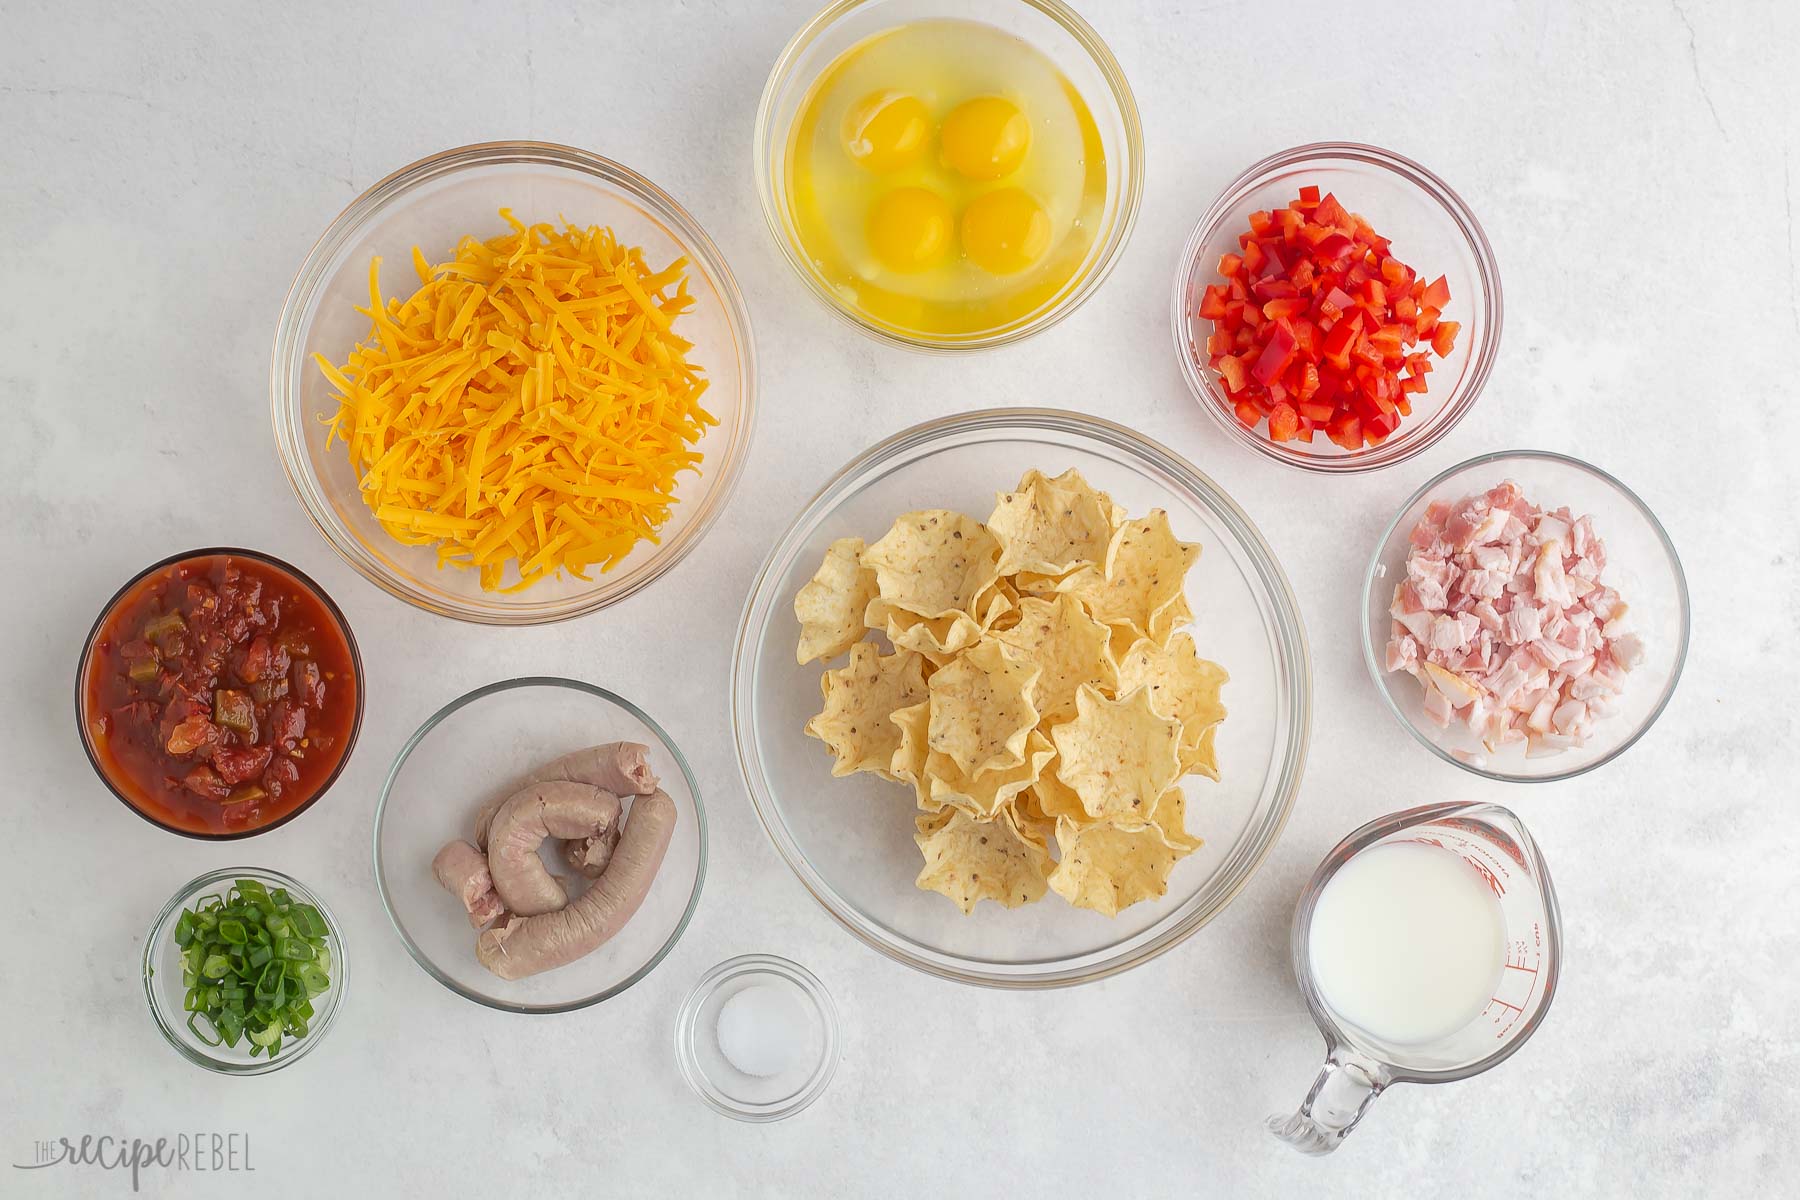 Top view of ingredients needed for breakfast taco bites in small glass bowls. 